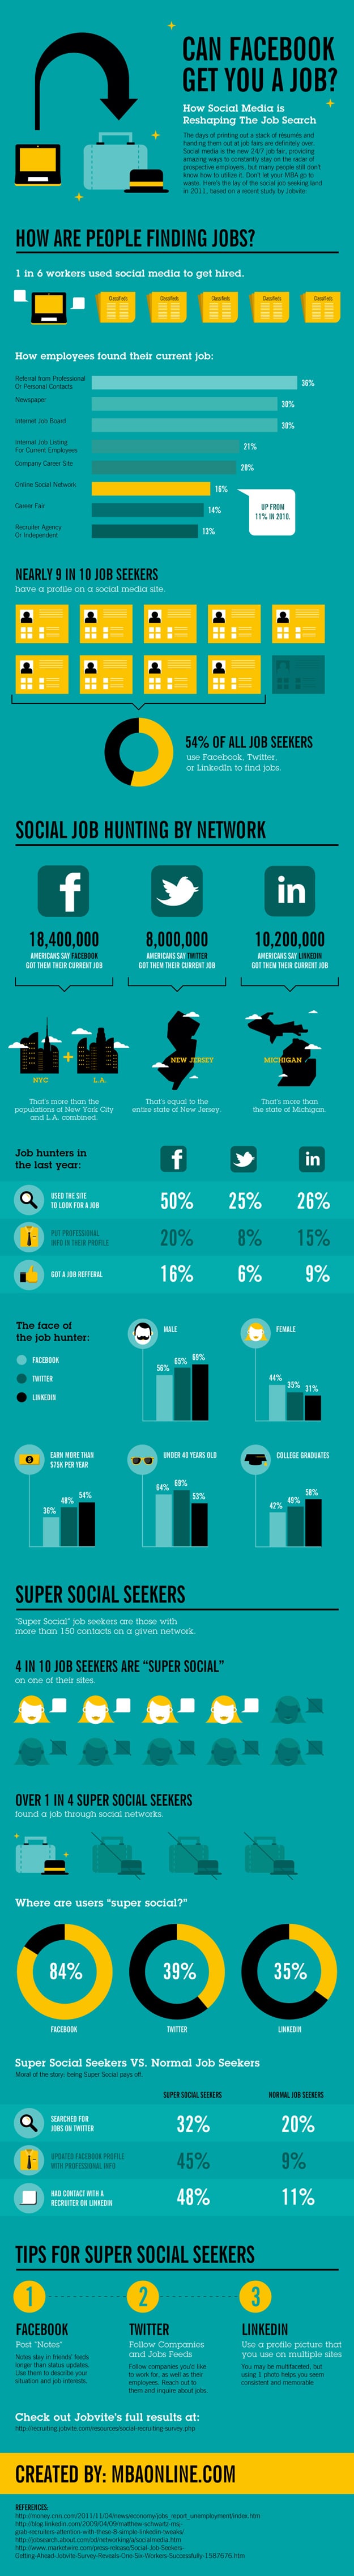 Social Media Job Hunting: Reshaping Our Future [Infographic]